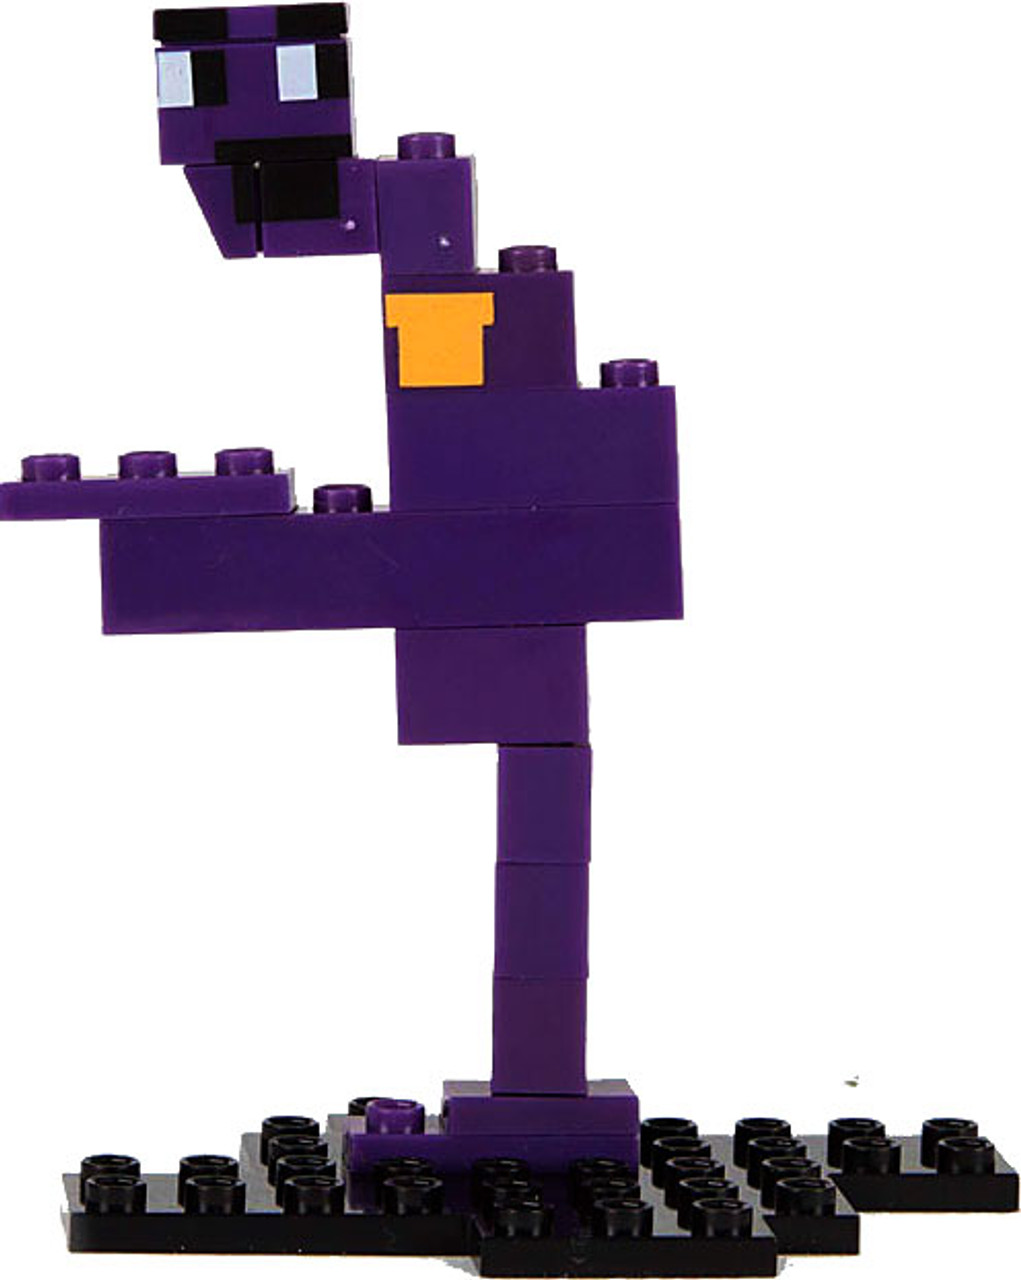 Mcfarlane Toys Five Nights At Freddys 8 Bit Series 1 Purple Guy Buildable Figure 12045 Golden Freddy Piece Toywiz - roblox purple guy outfit